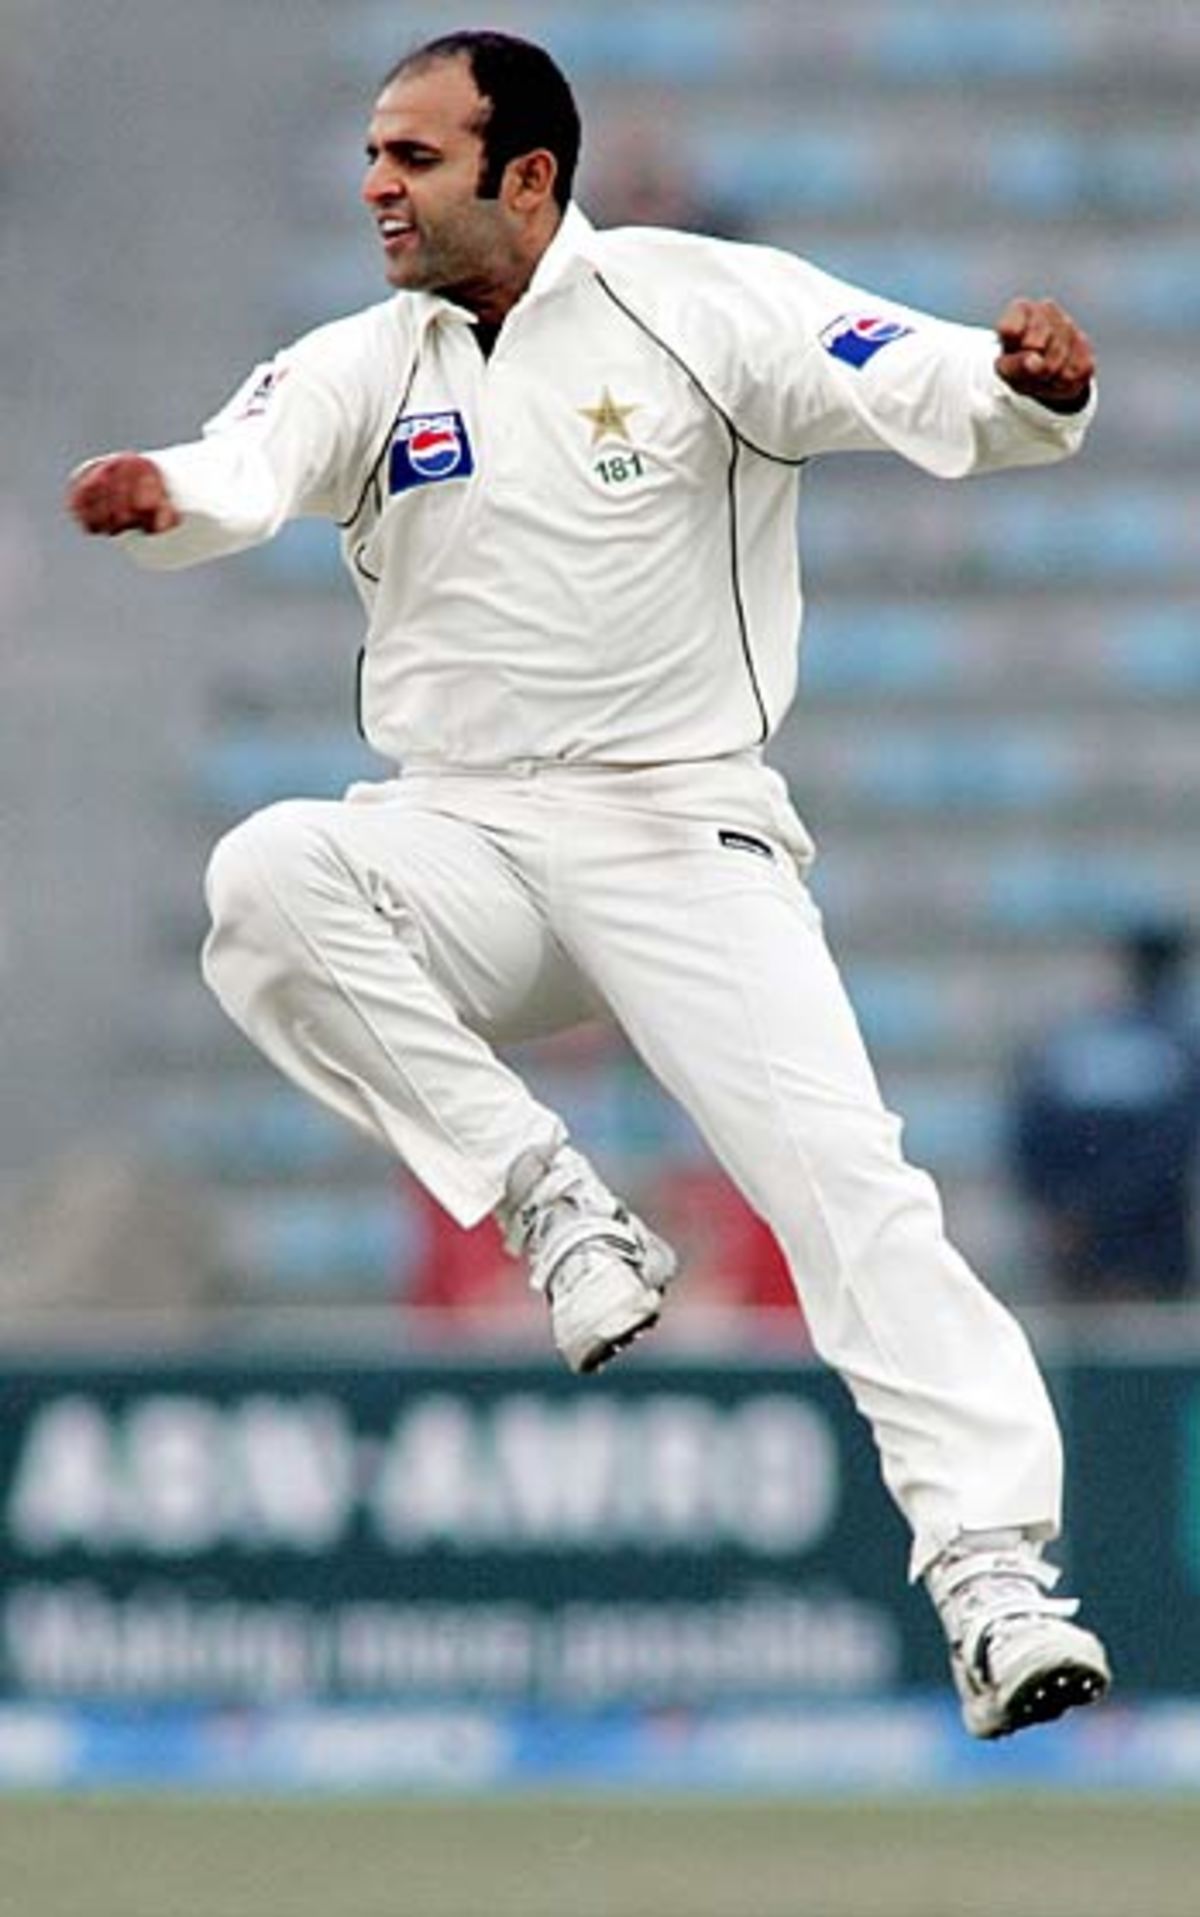 Naved-ul-Hasan whoops it up after dismissing Virender Sehwag for 254, India in Pakistan, 1st Test, Lahore, January 17, 2006